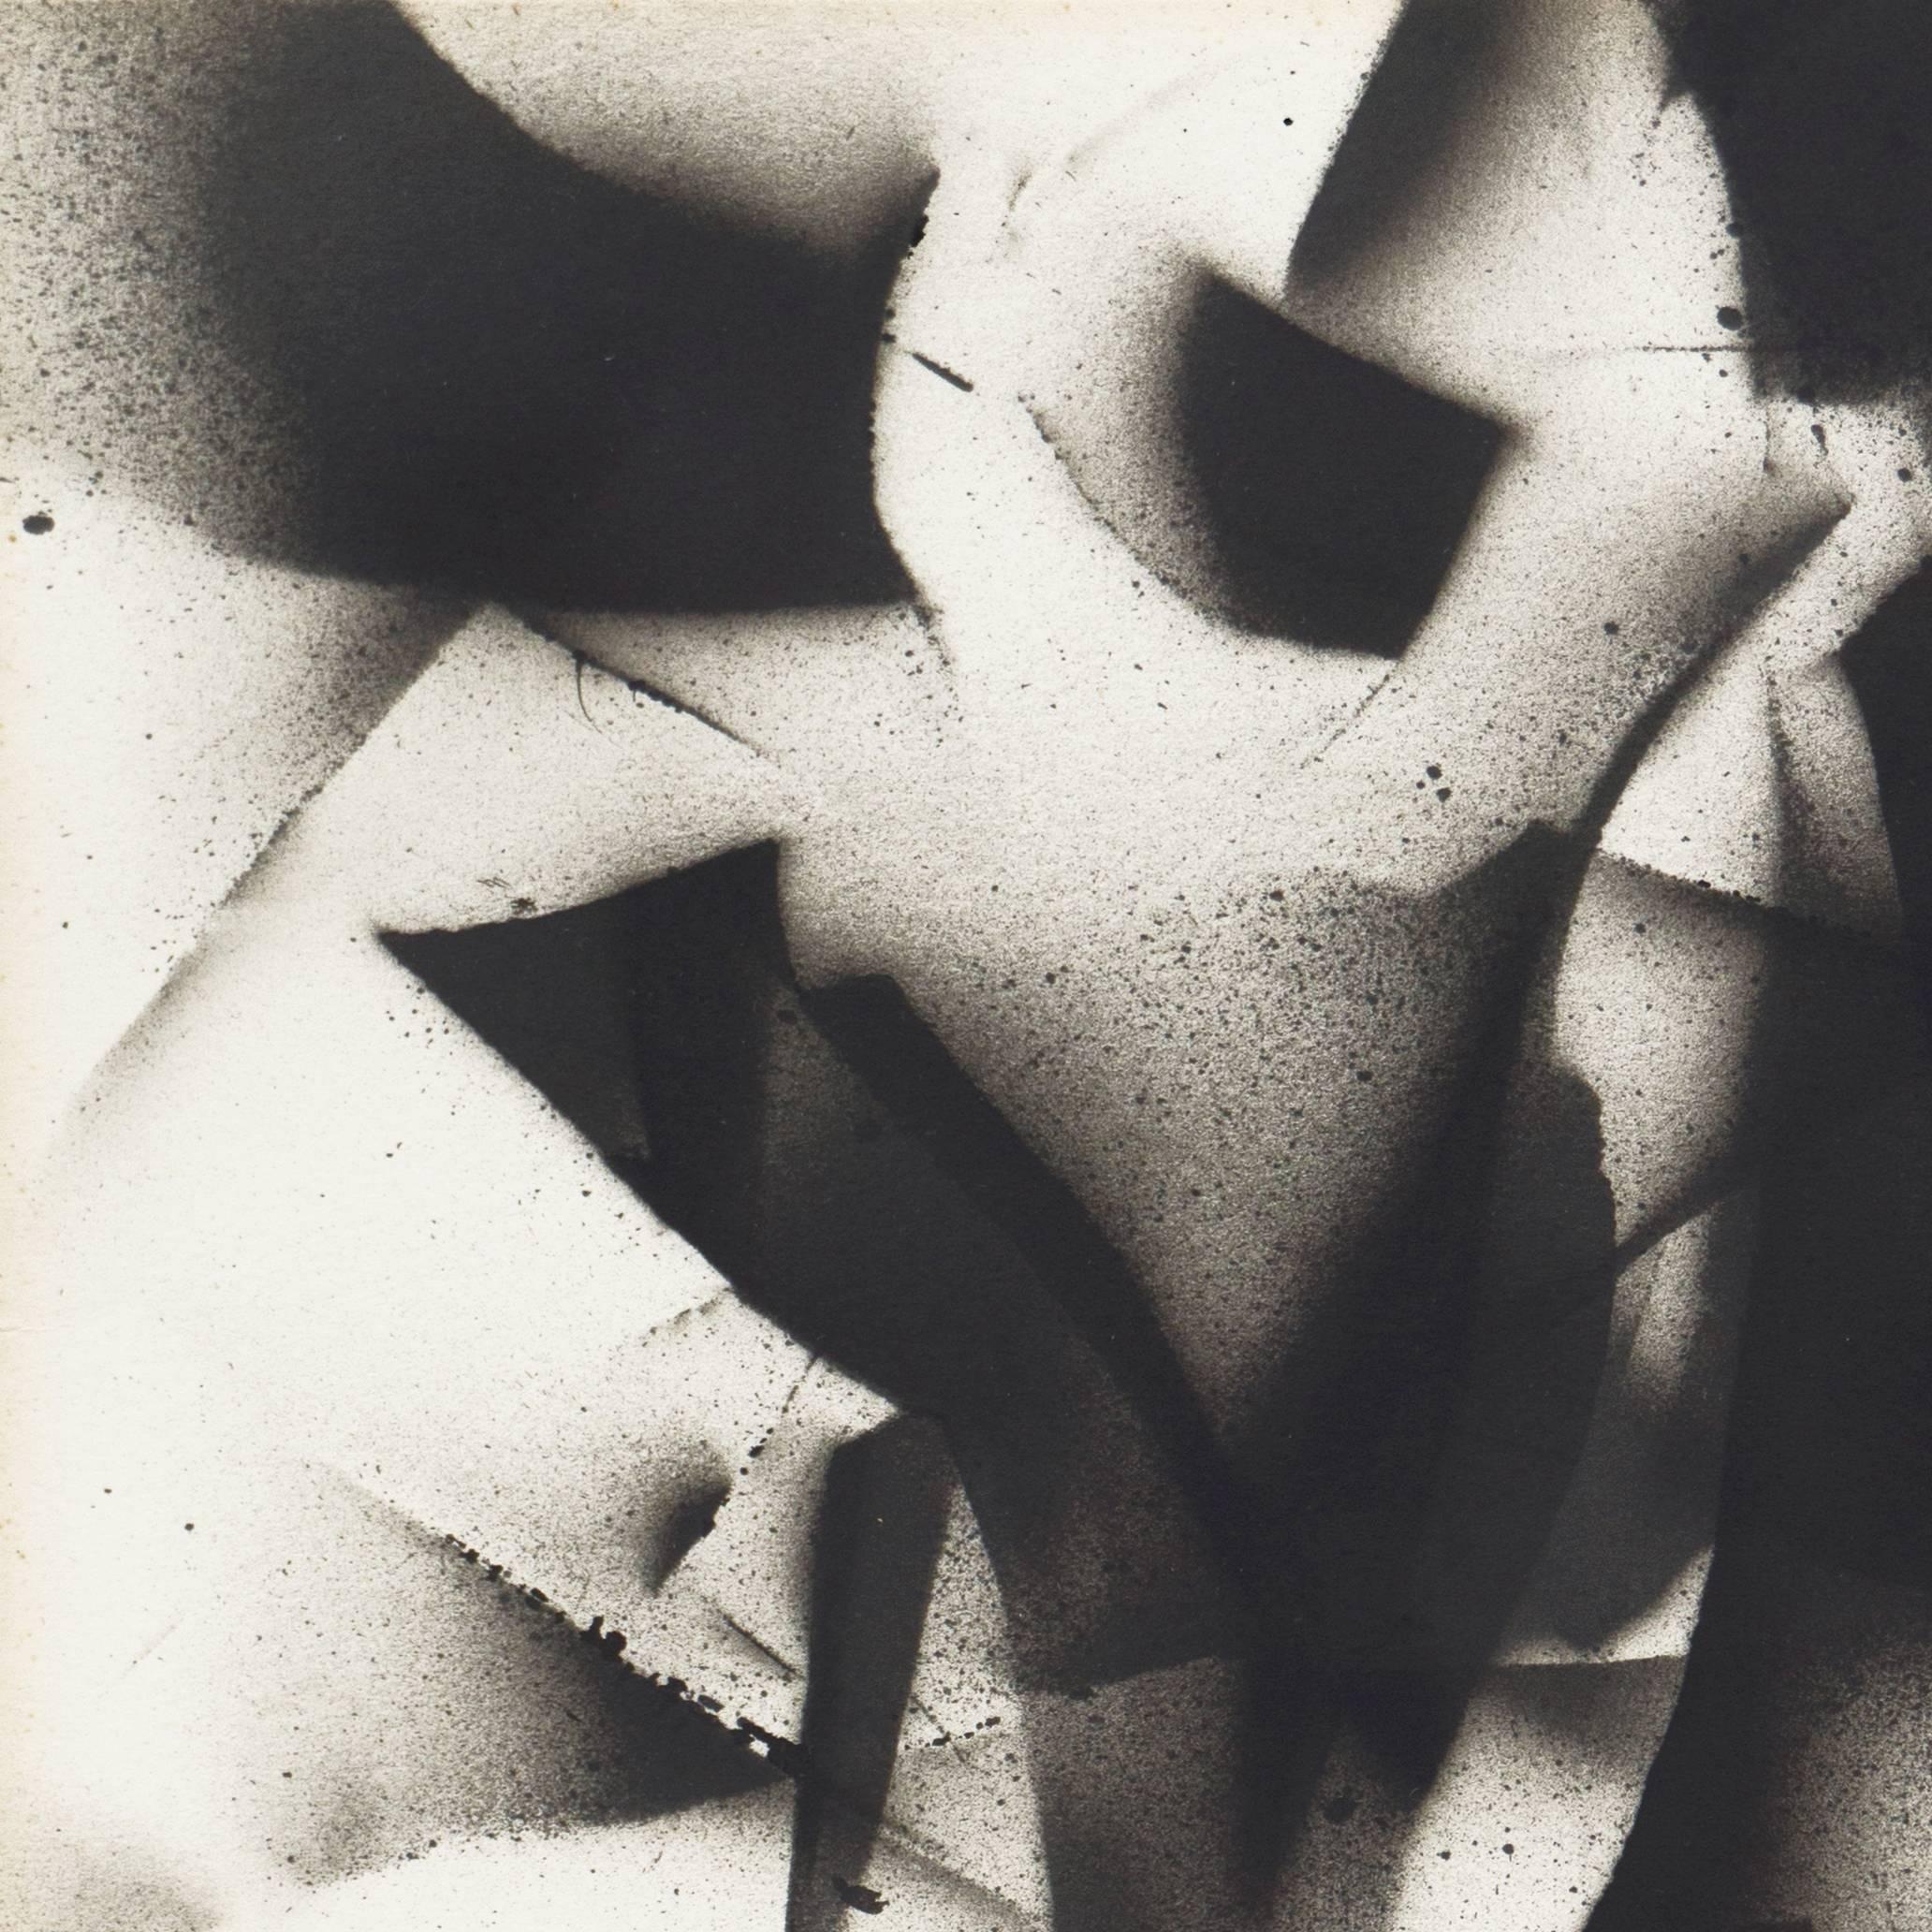 A Cubist-derived exploration of tone and the human form using airbrush techniques and negative space.

Signed lower left 'G. Distefano' and dated 1965.

